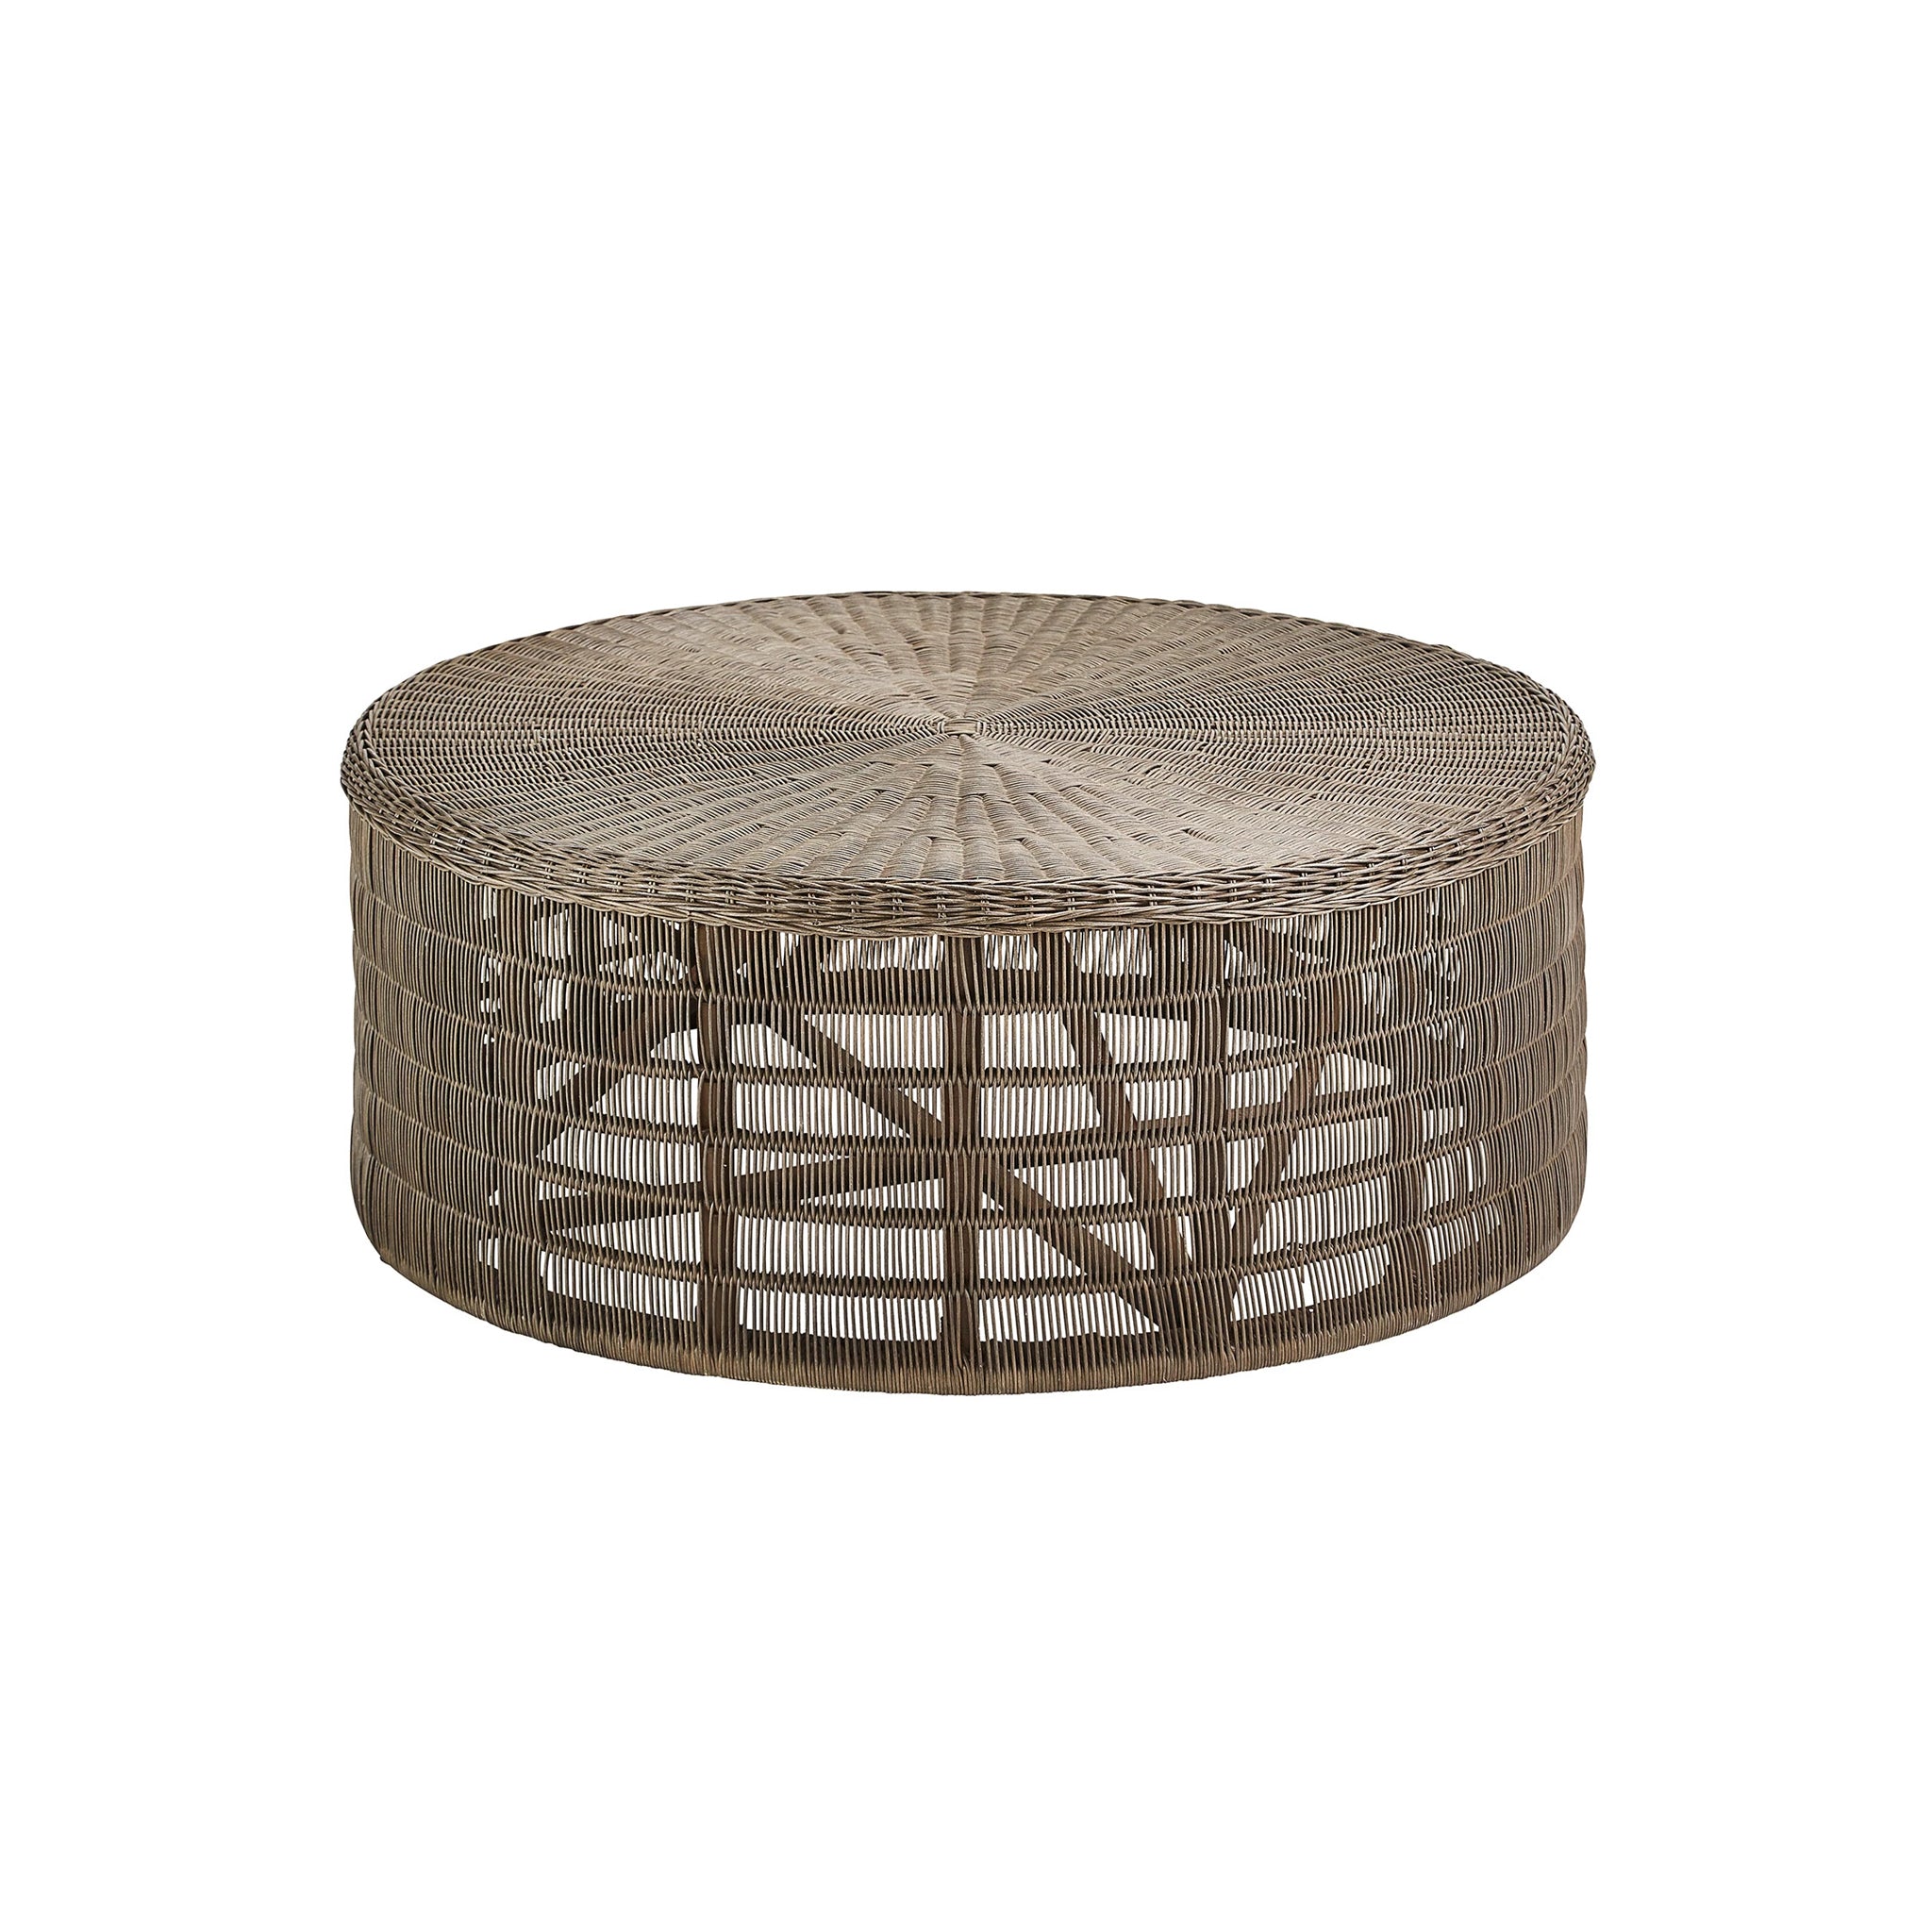 Woven Circular Patio Table with Recessed Base